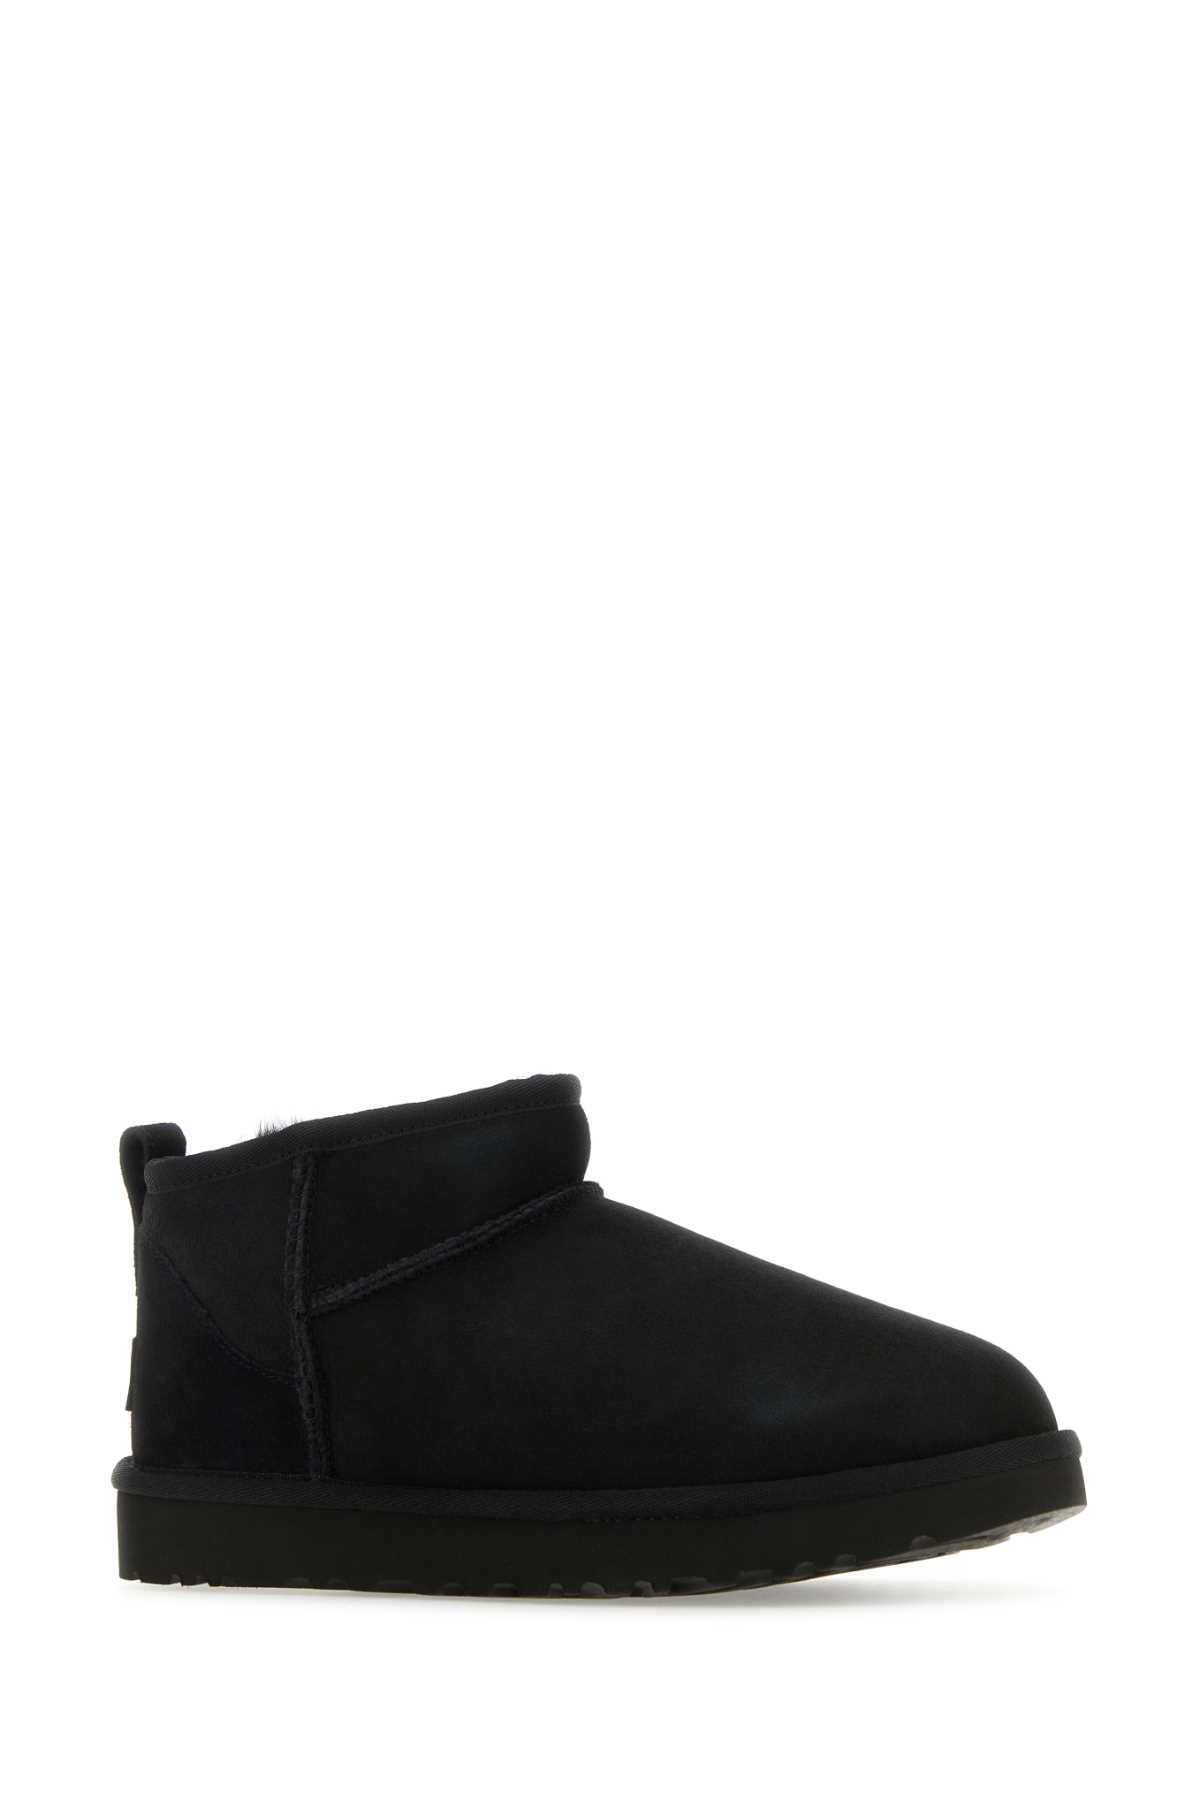 Shop Ugg Black Suede Classic Ultra Mini Ankle Boots